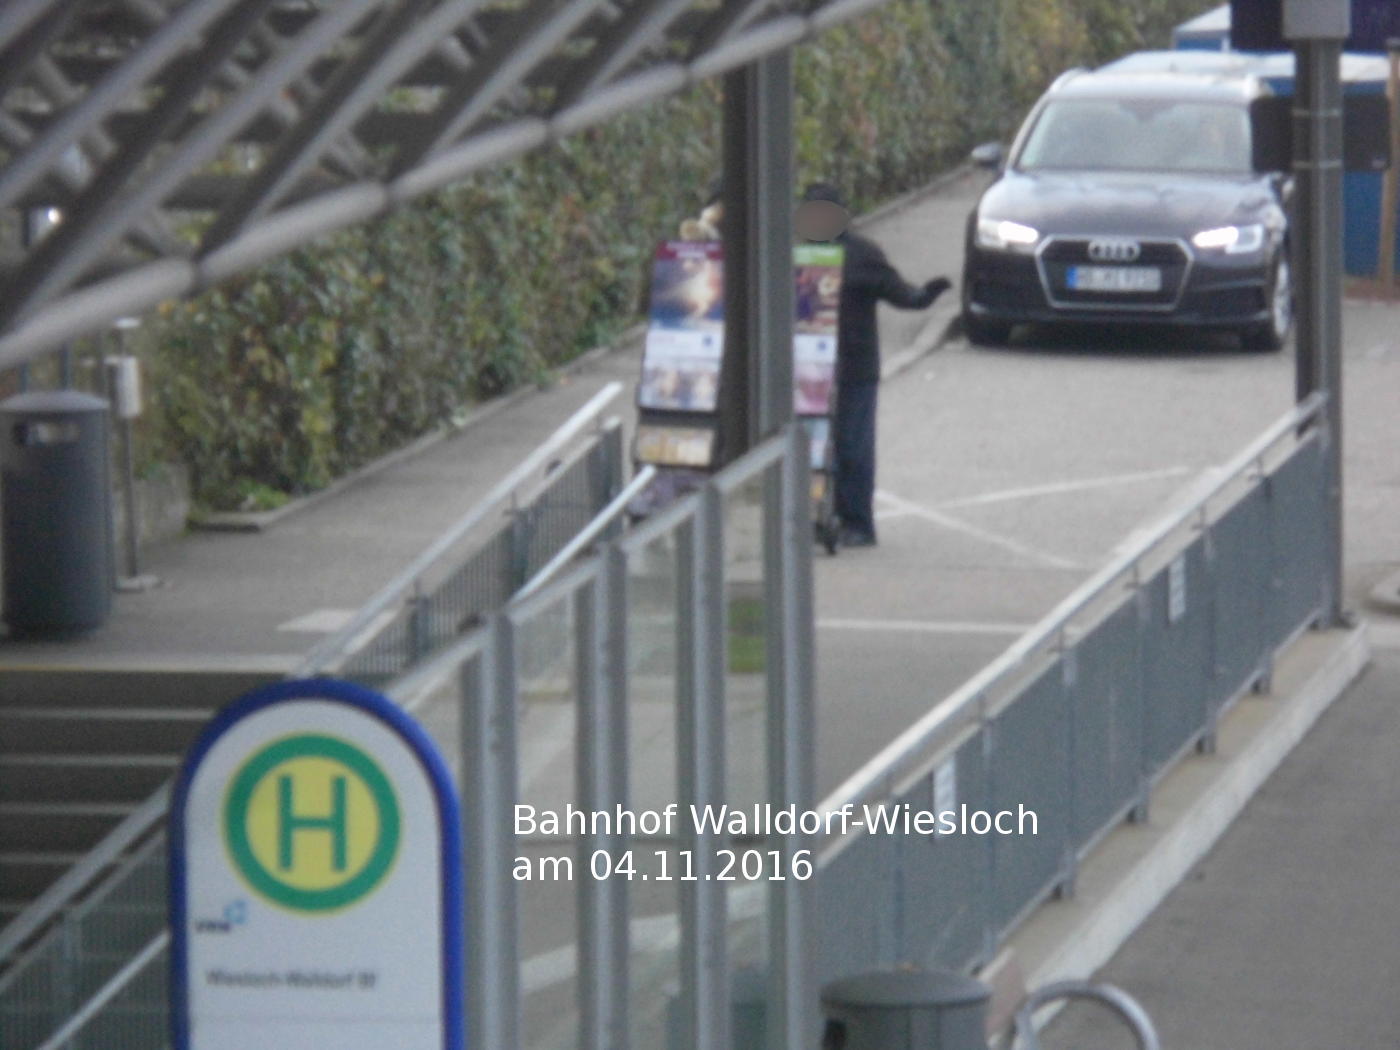 Hare and hedgehog at Walldorf-Wiesloch railway station